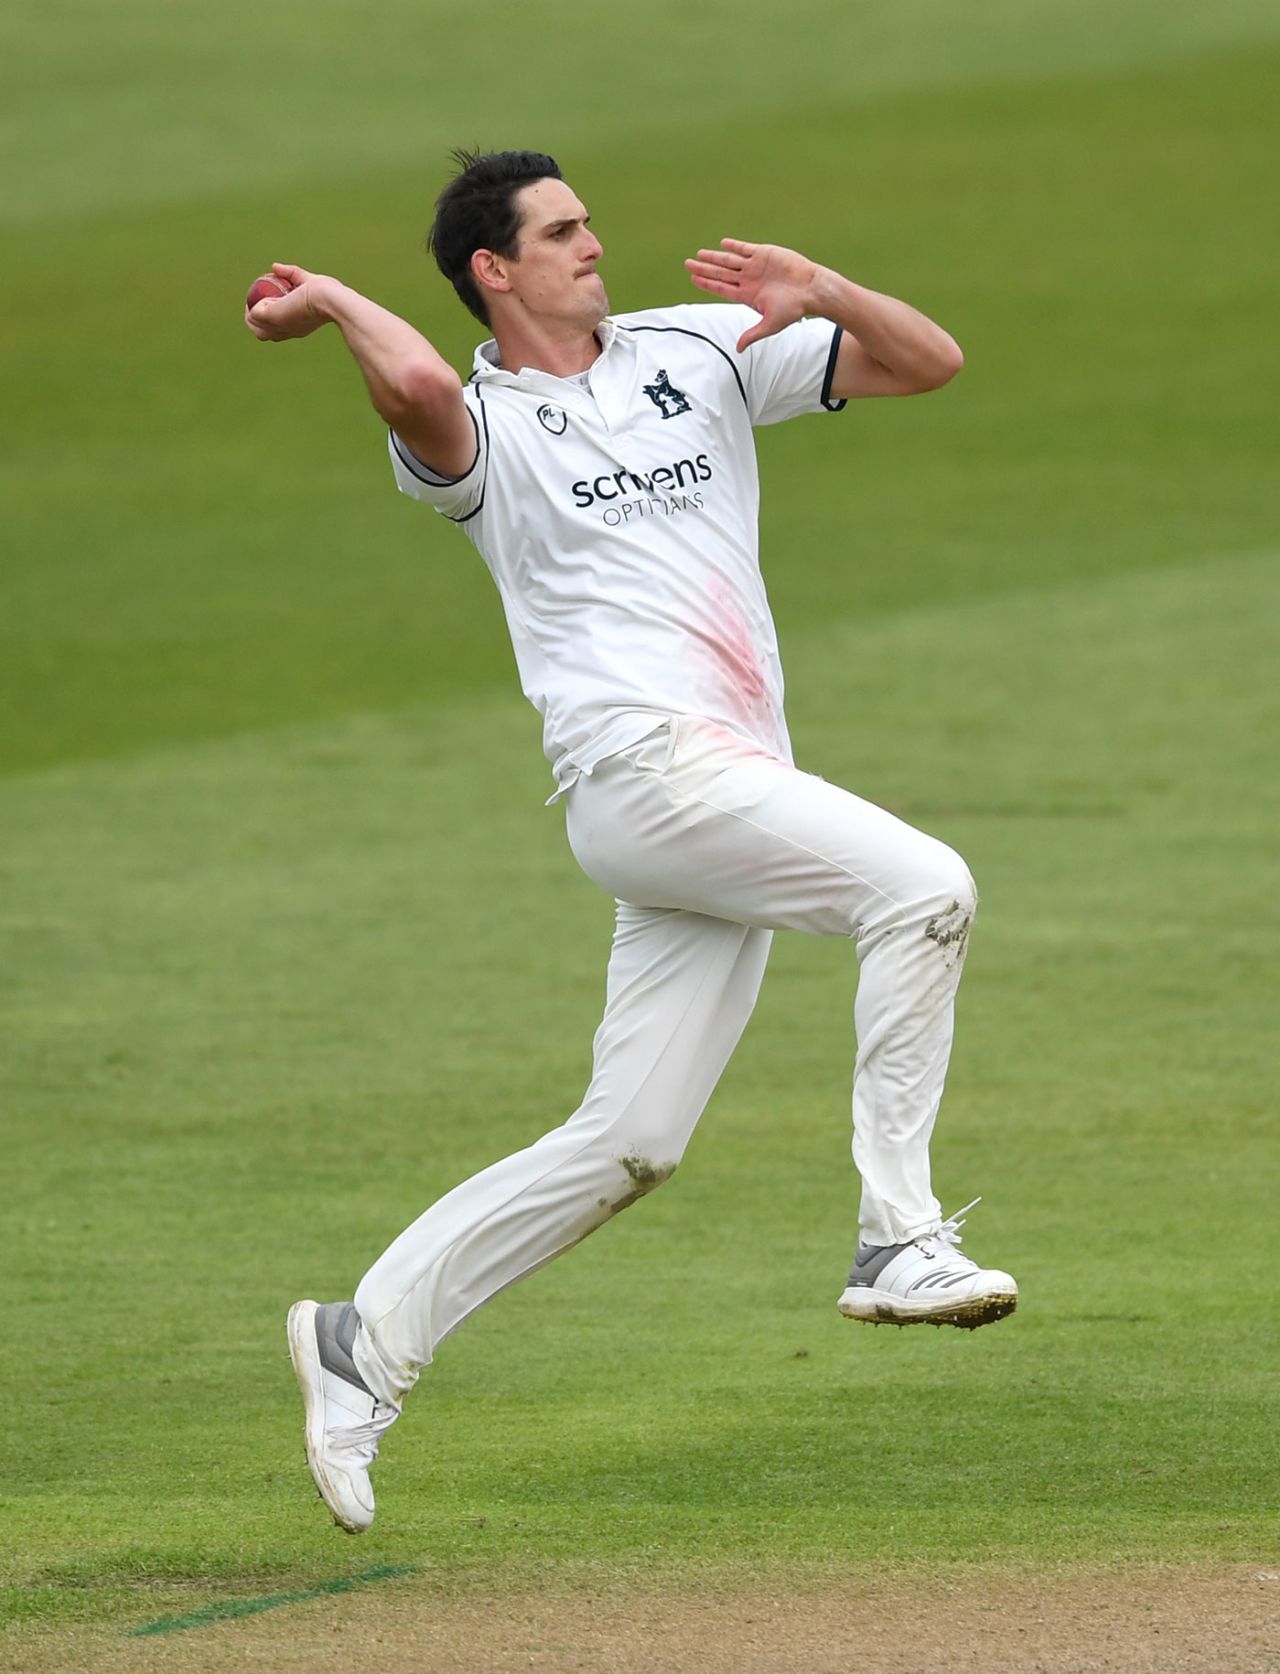 Chris Wright has remained a valuable part of Warwickshire's Championship attack, May 3, 2018